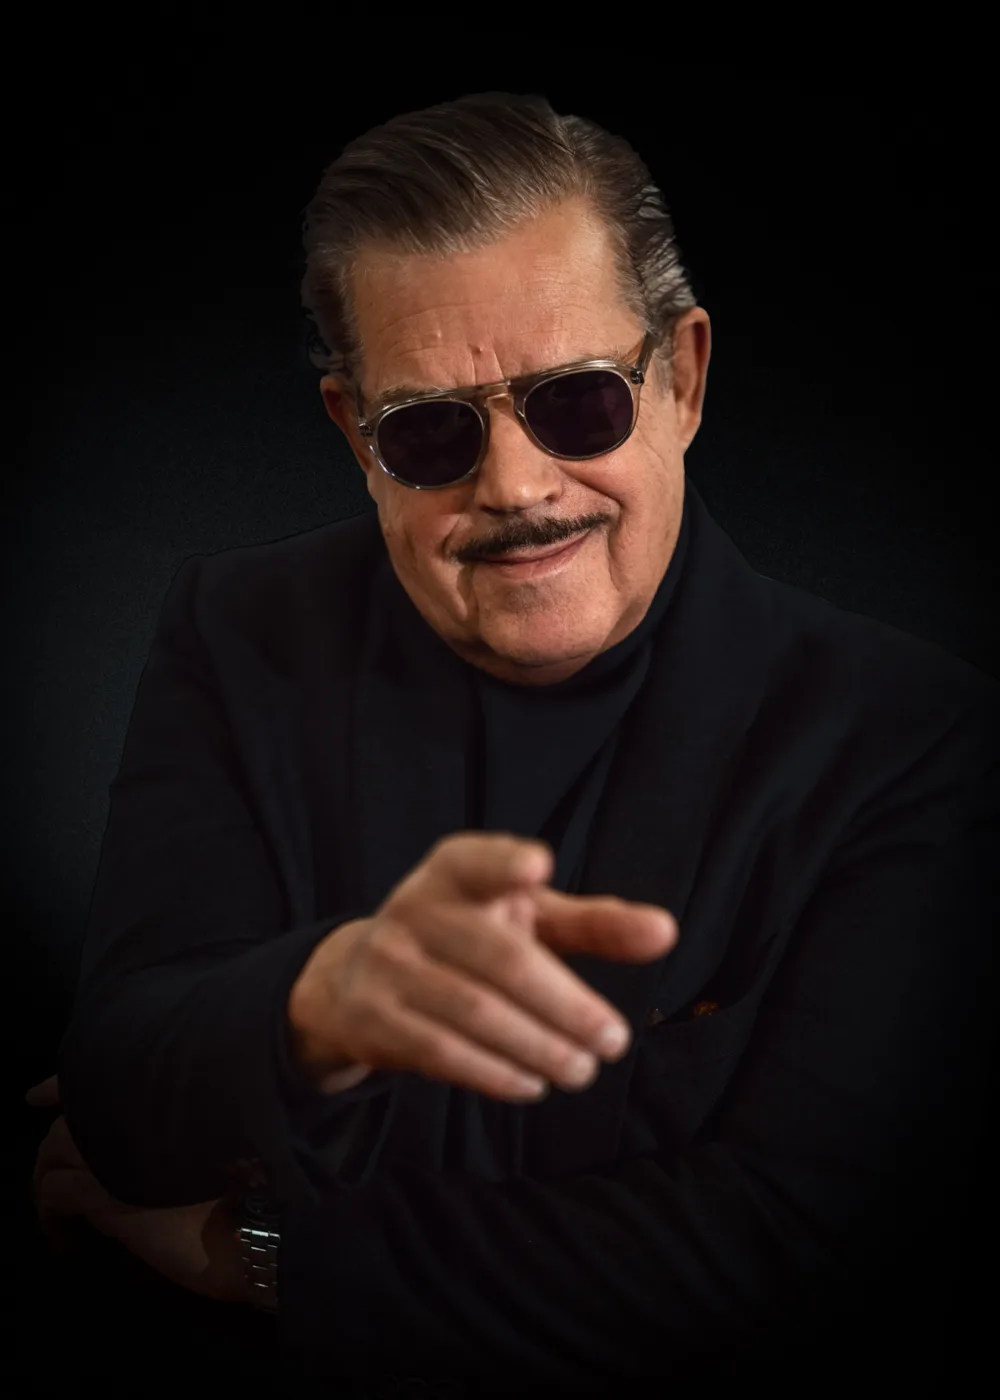 Boris Blank is a Swiss musician, composer, and record producer. He was born on January 15, 1952, in Zurich, Switzerland. Blank is best known as a founding member of the influential Swiss electronic music duo Yello, which he formed with vocalist Dieter Meier in 1979. As a member of Yello, Blank has produced and co-written many hit songs, including 